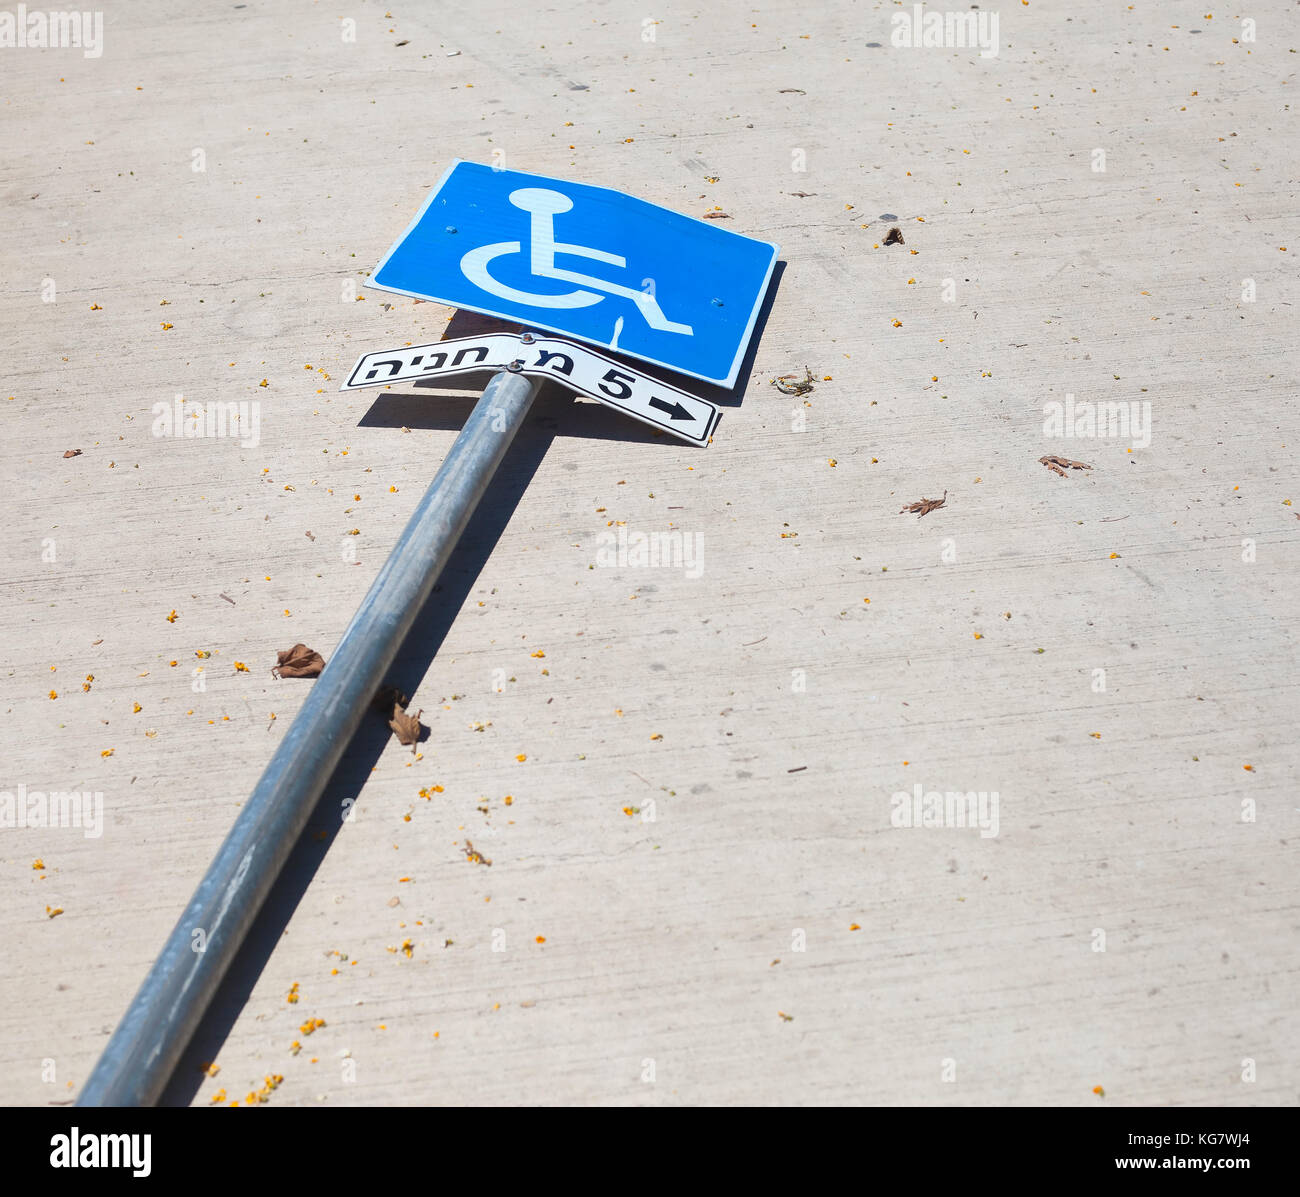 Reserved parking sign knocked over on the road. The letters in Hebrew read 'Parking 5 m' Stock Photo